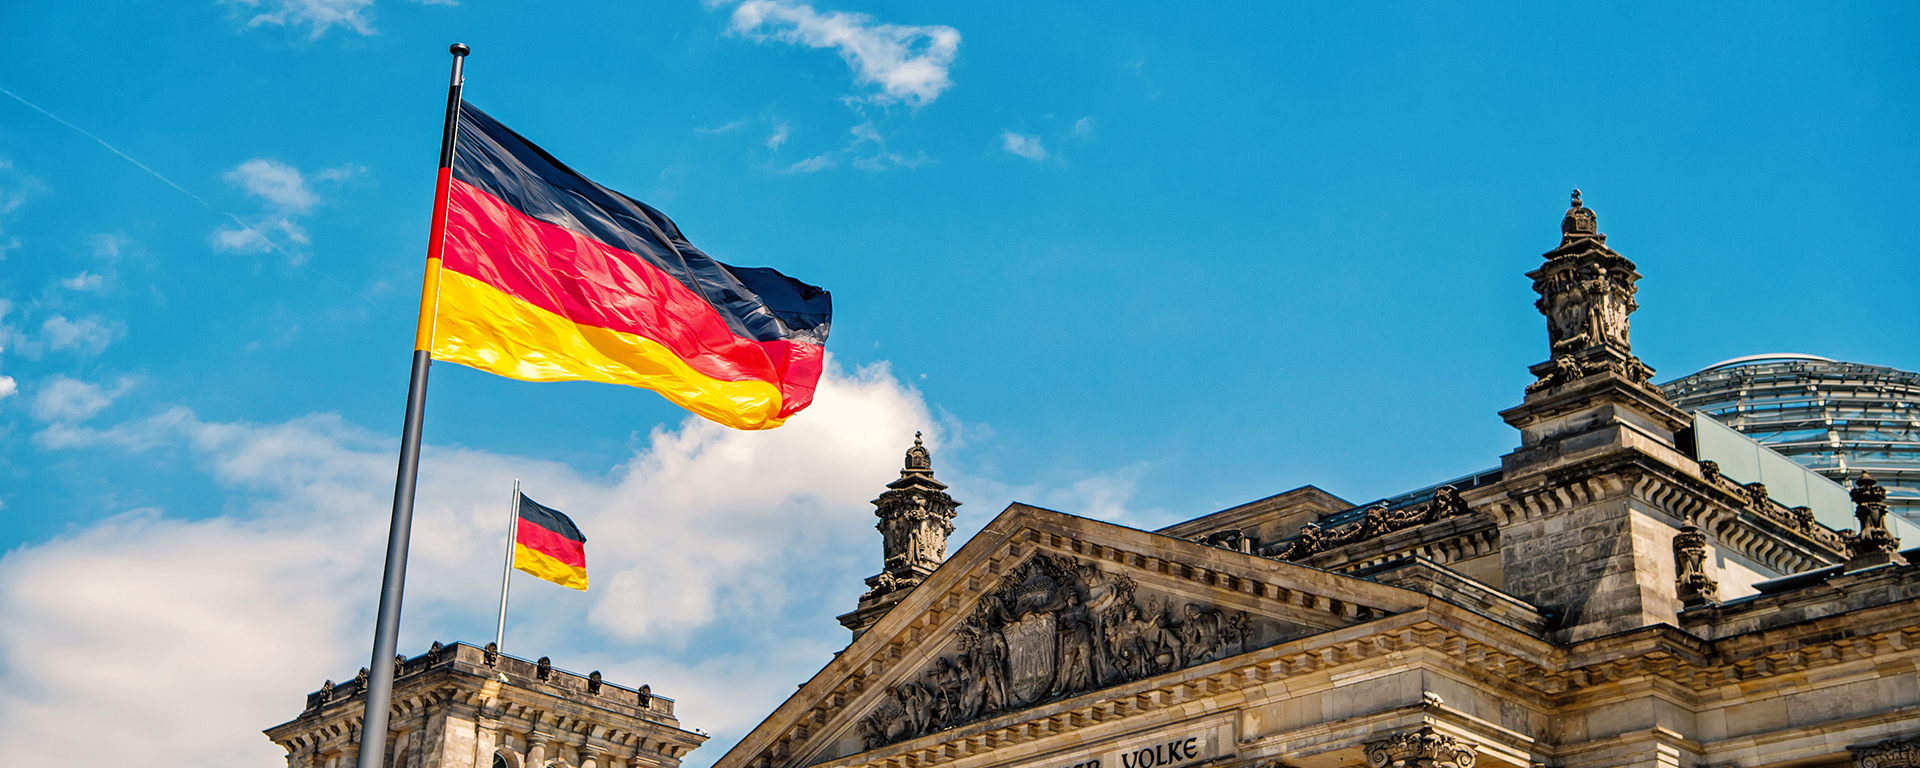 German flags waving in the wind at famous Reichstag building, seat of the German Parliament Deutscher Bundestag , on a sunny day with blue sky and clouds, central Berlin Mitte district, Germany